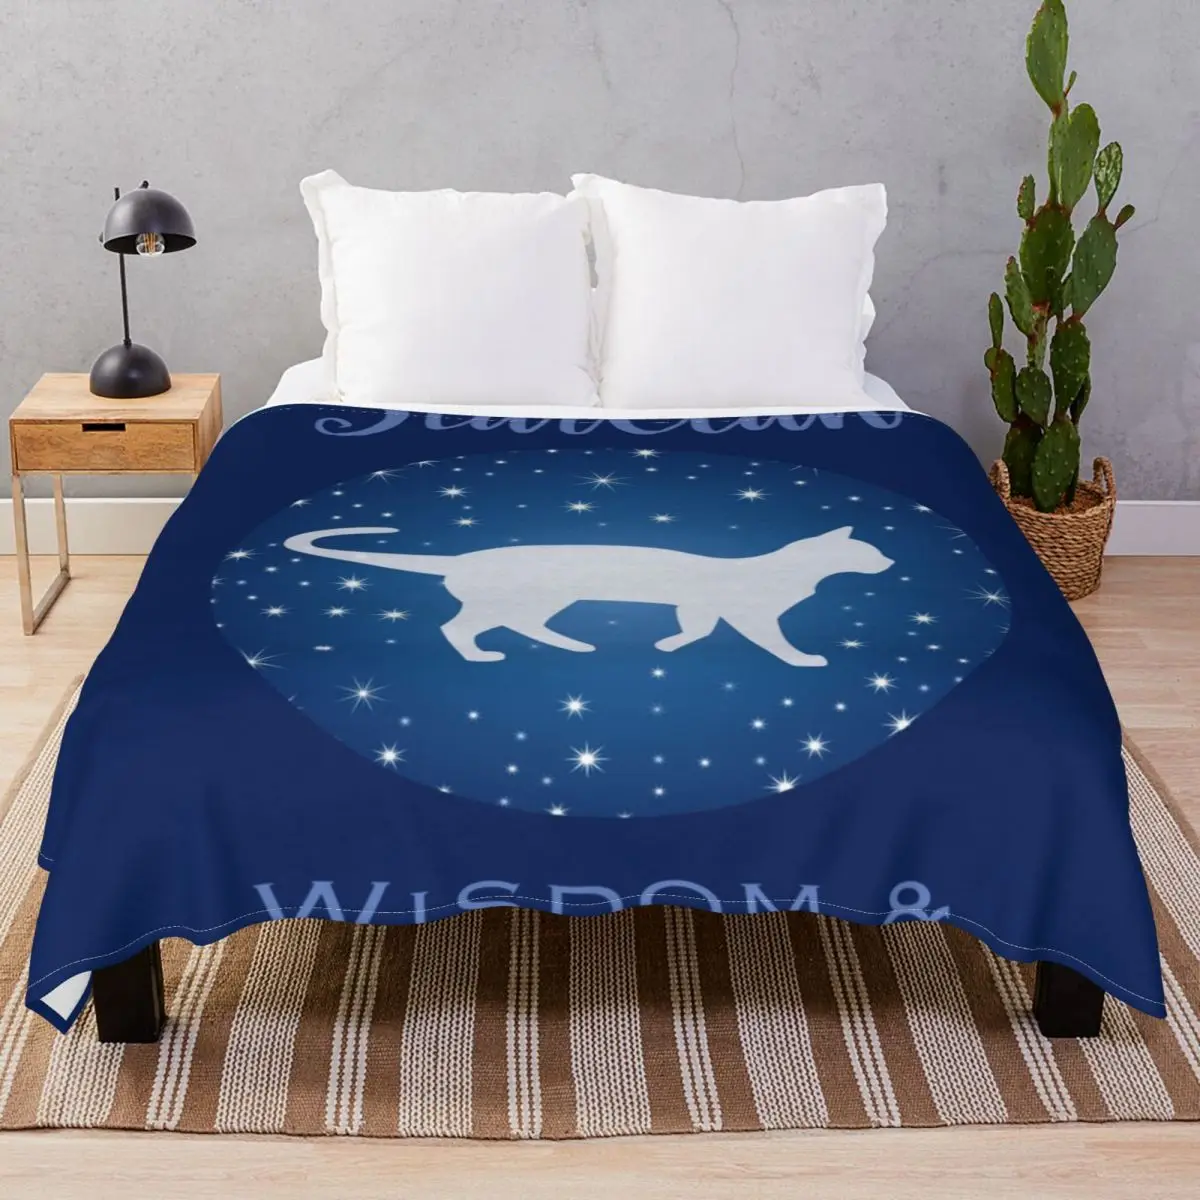 StarClan Dreams Blankets Fleece Spring/Autumn Breathable Throw Blanket for Bedding Home Couch Travel Office